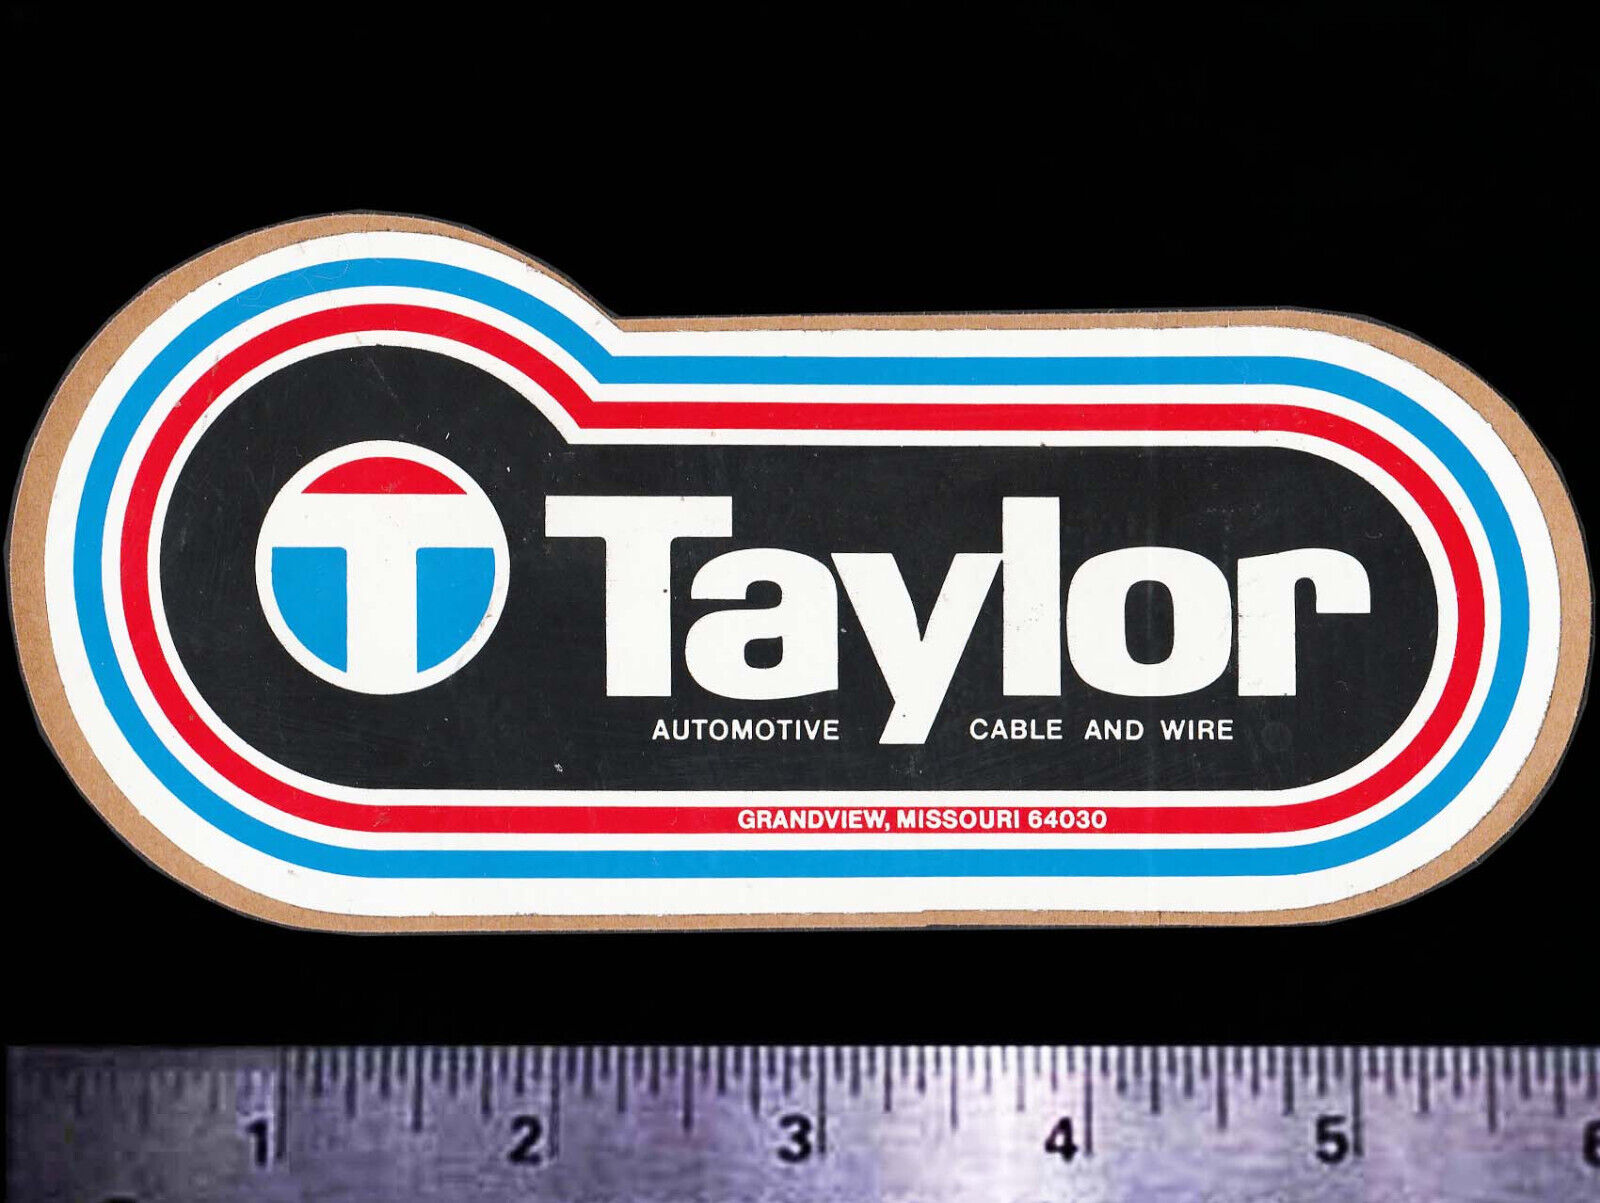 TAYLOR Automotive Cable and Wire - Original Vintage 1970’s Racing Decal/Sticker